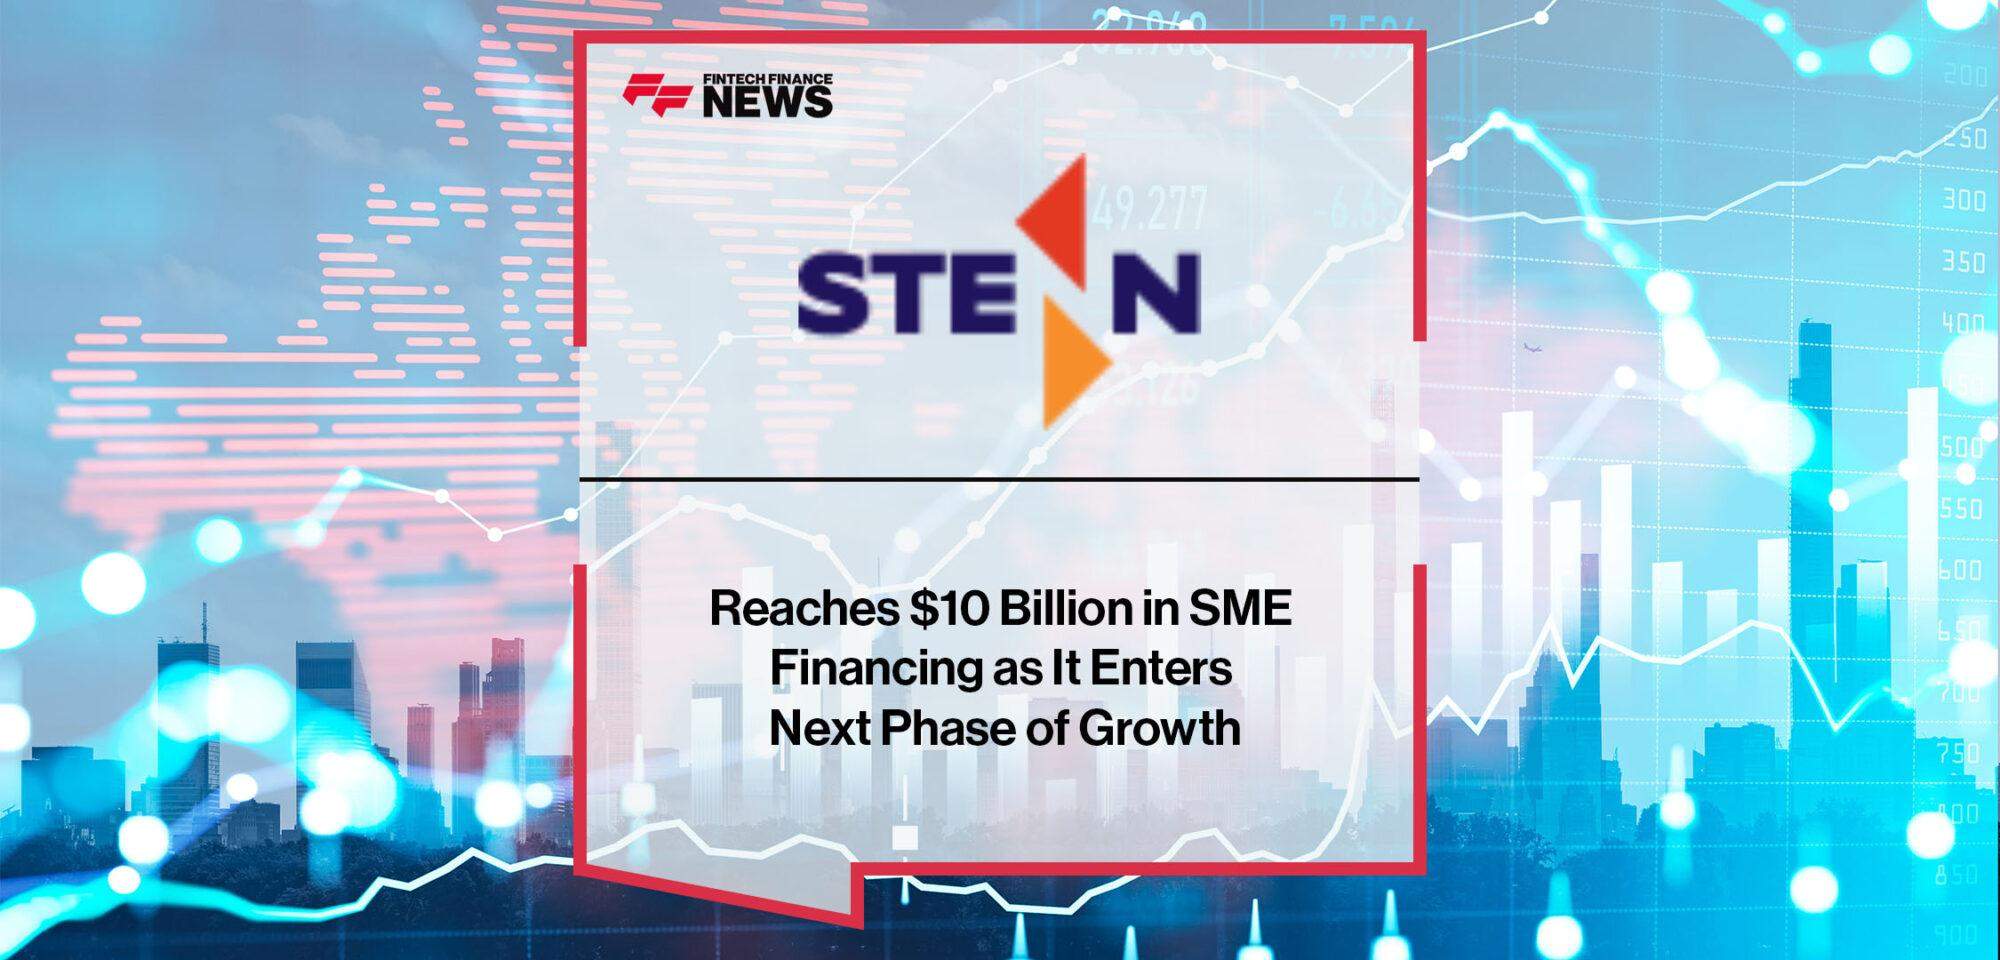 Stenn Reaches 10 Billion in SME Financing as It Enters Next Phase of Growth